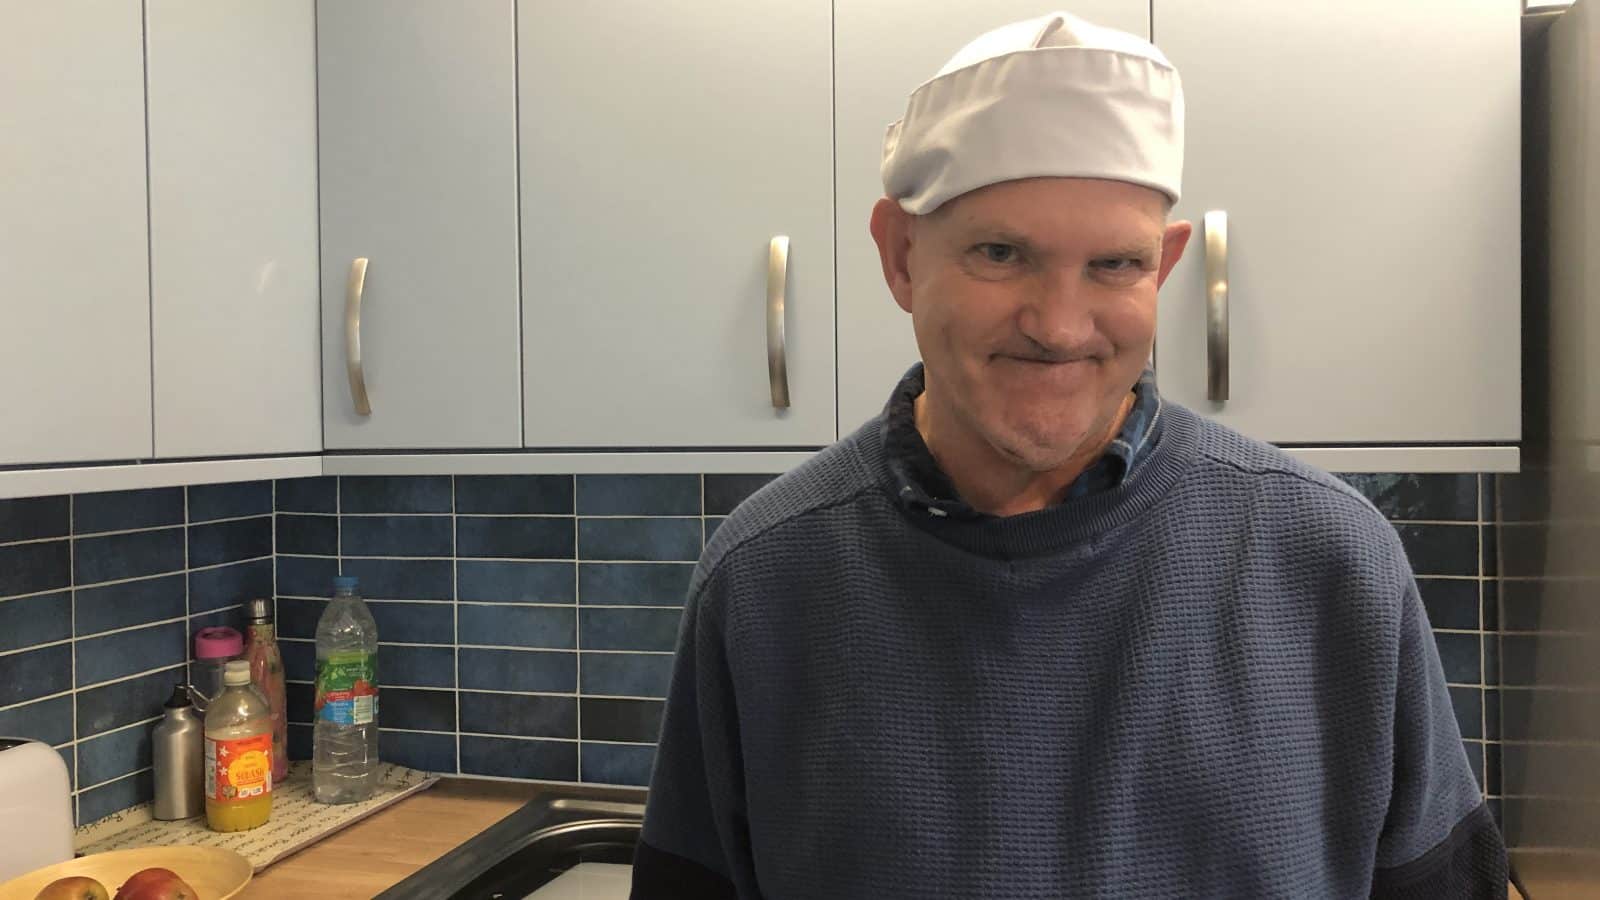 Peter in his chef's hat